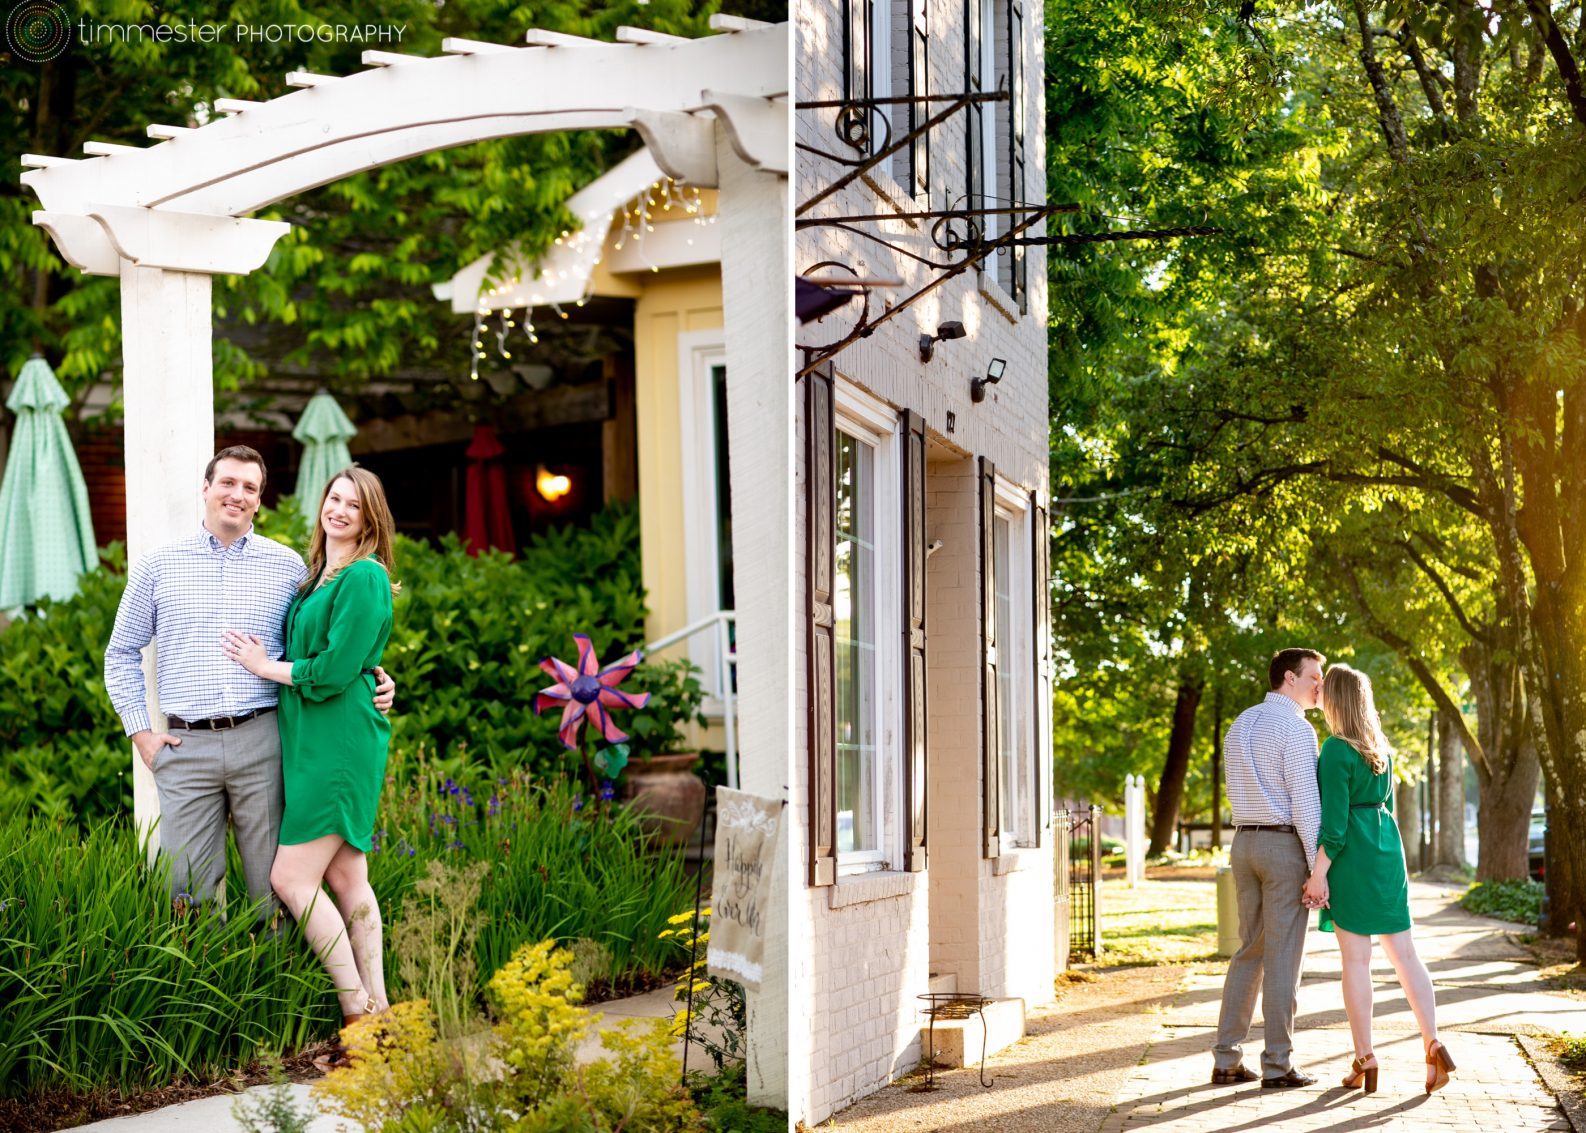 Downtown Cary engagement session in North Carolina.